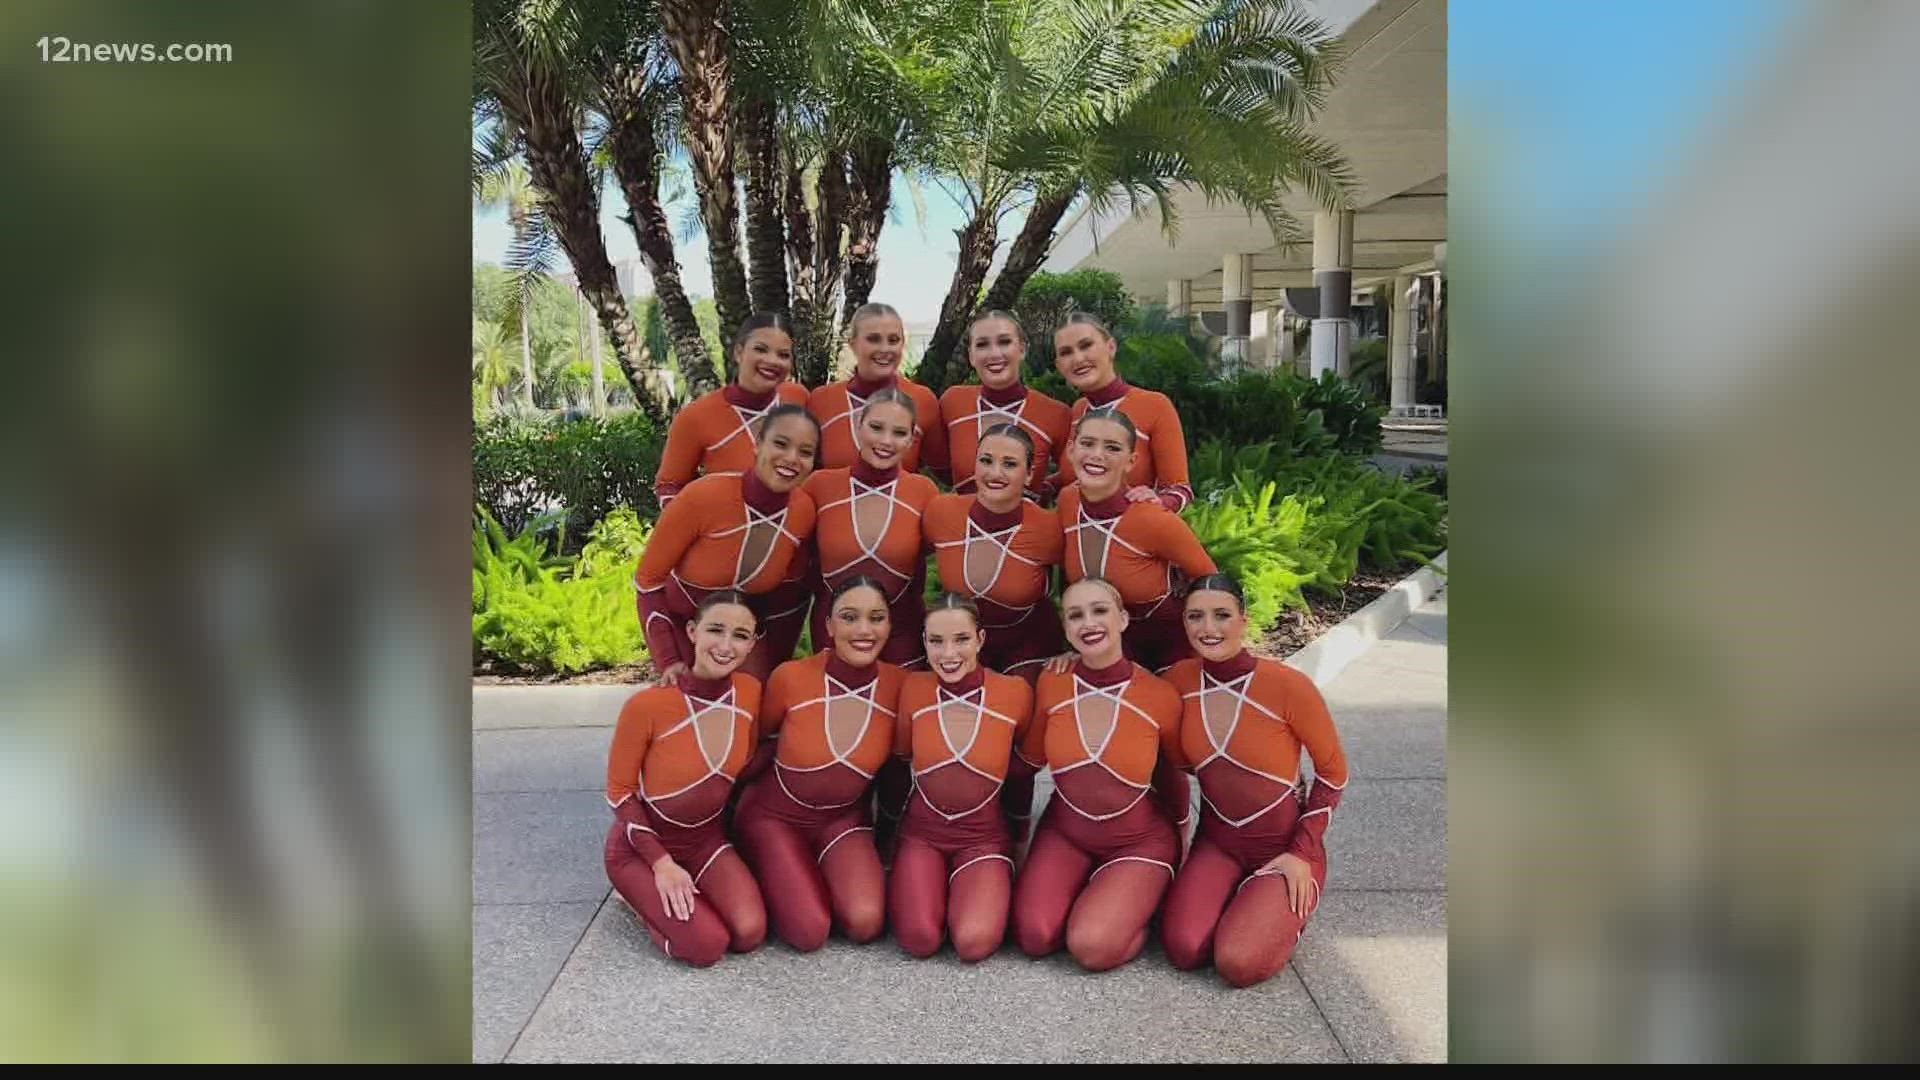 ASU Dance Team wins first place in College Classic National Invitational.